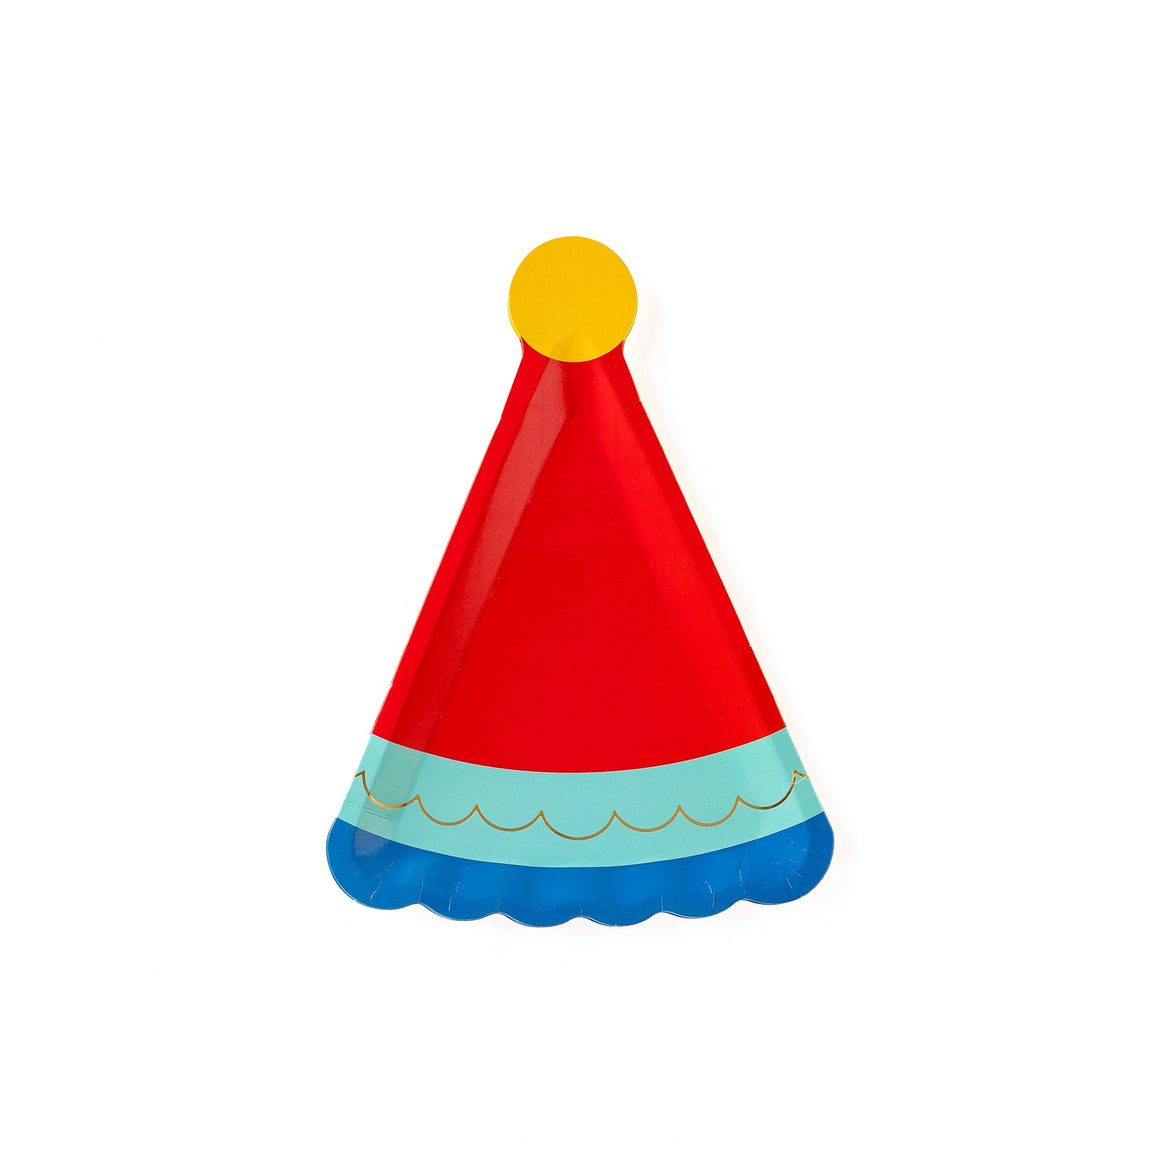 Blue birthday hat shaped paper plate.